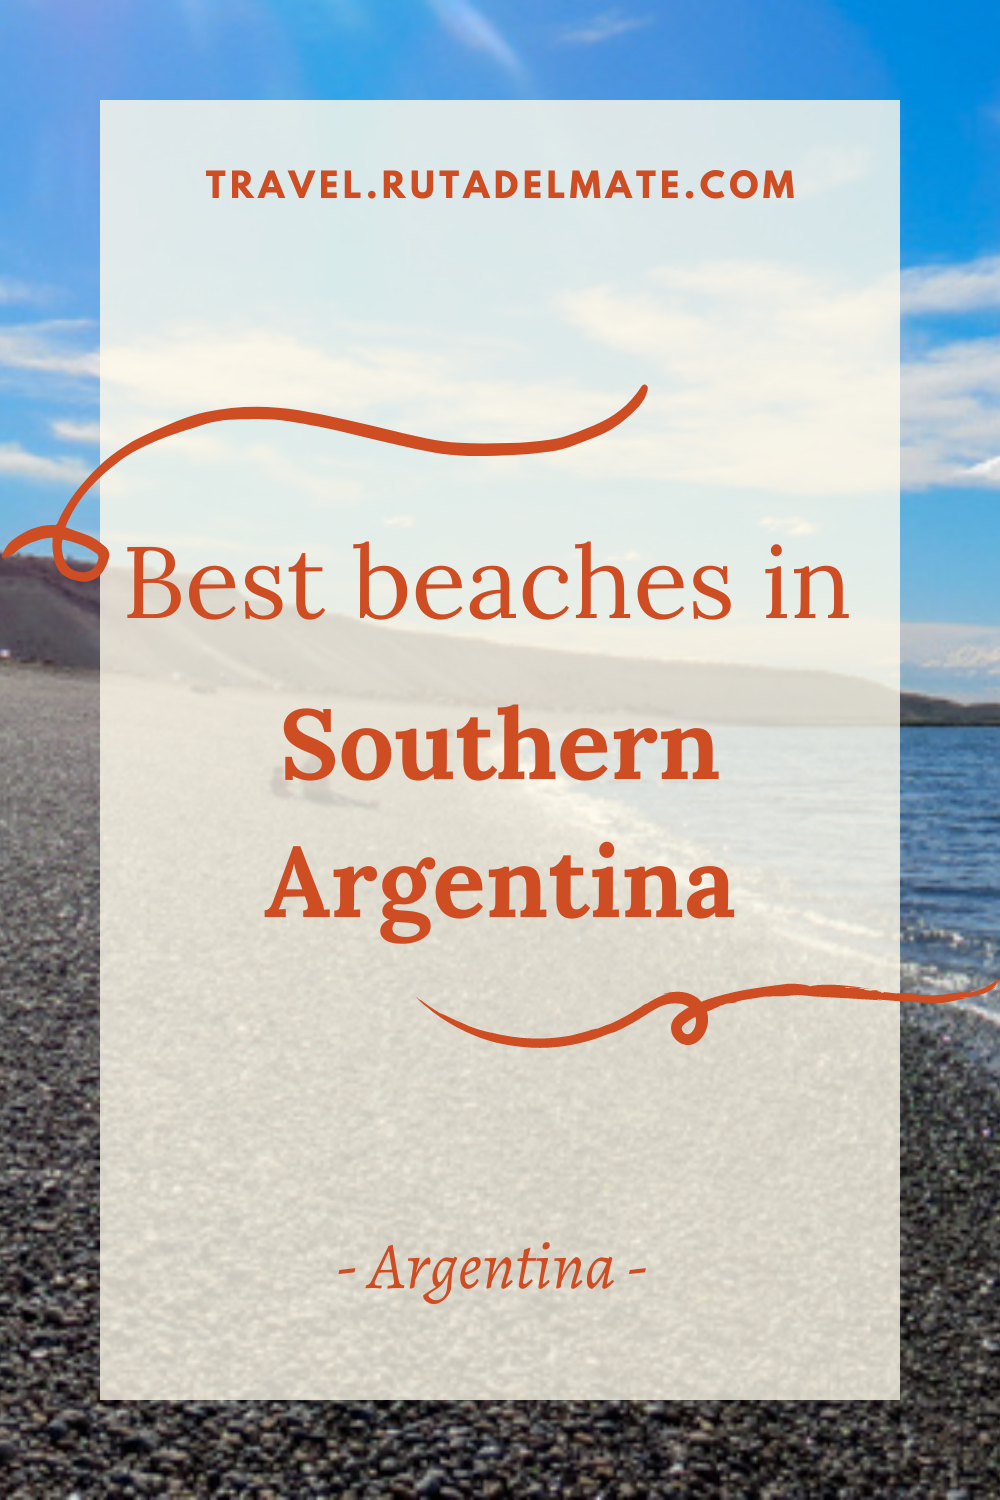 Beaches in Southern Argentina